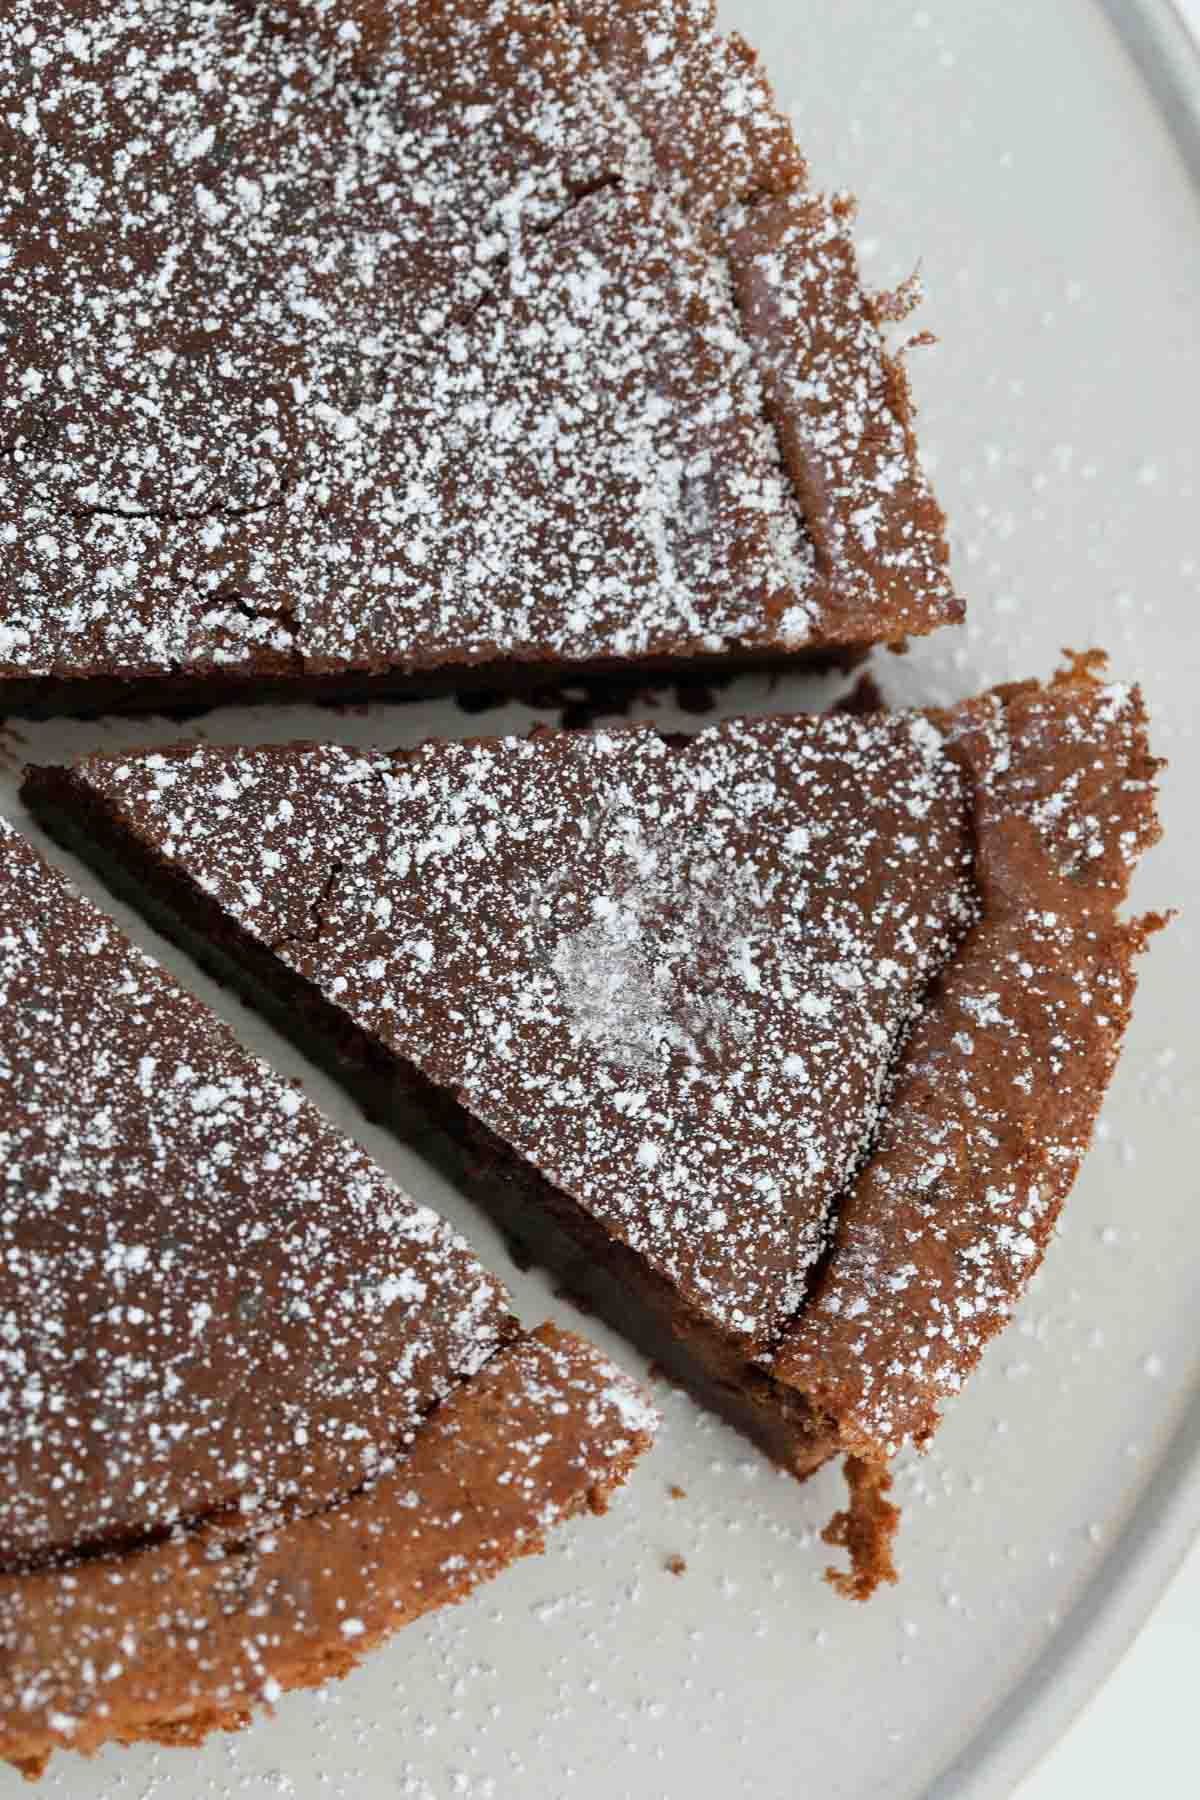 Baked Nutella cake sprinkled with icing sugar.